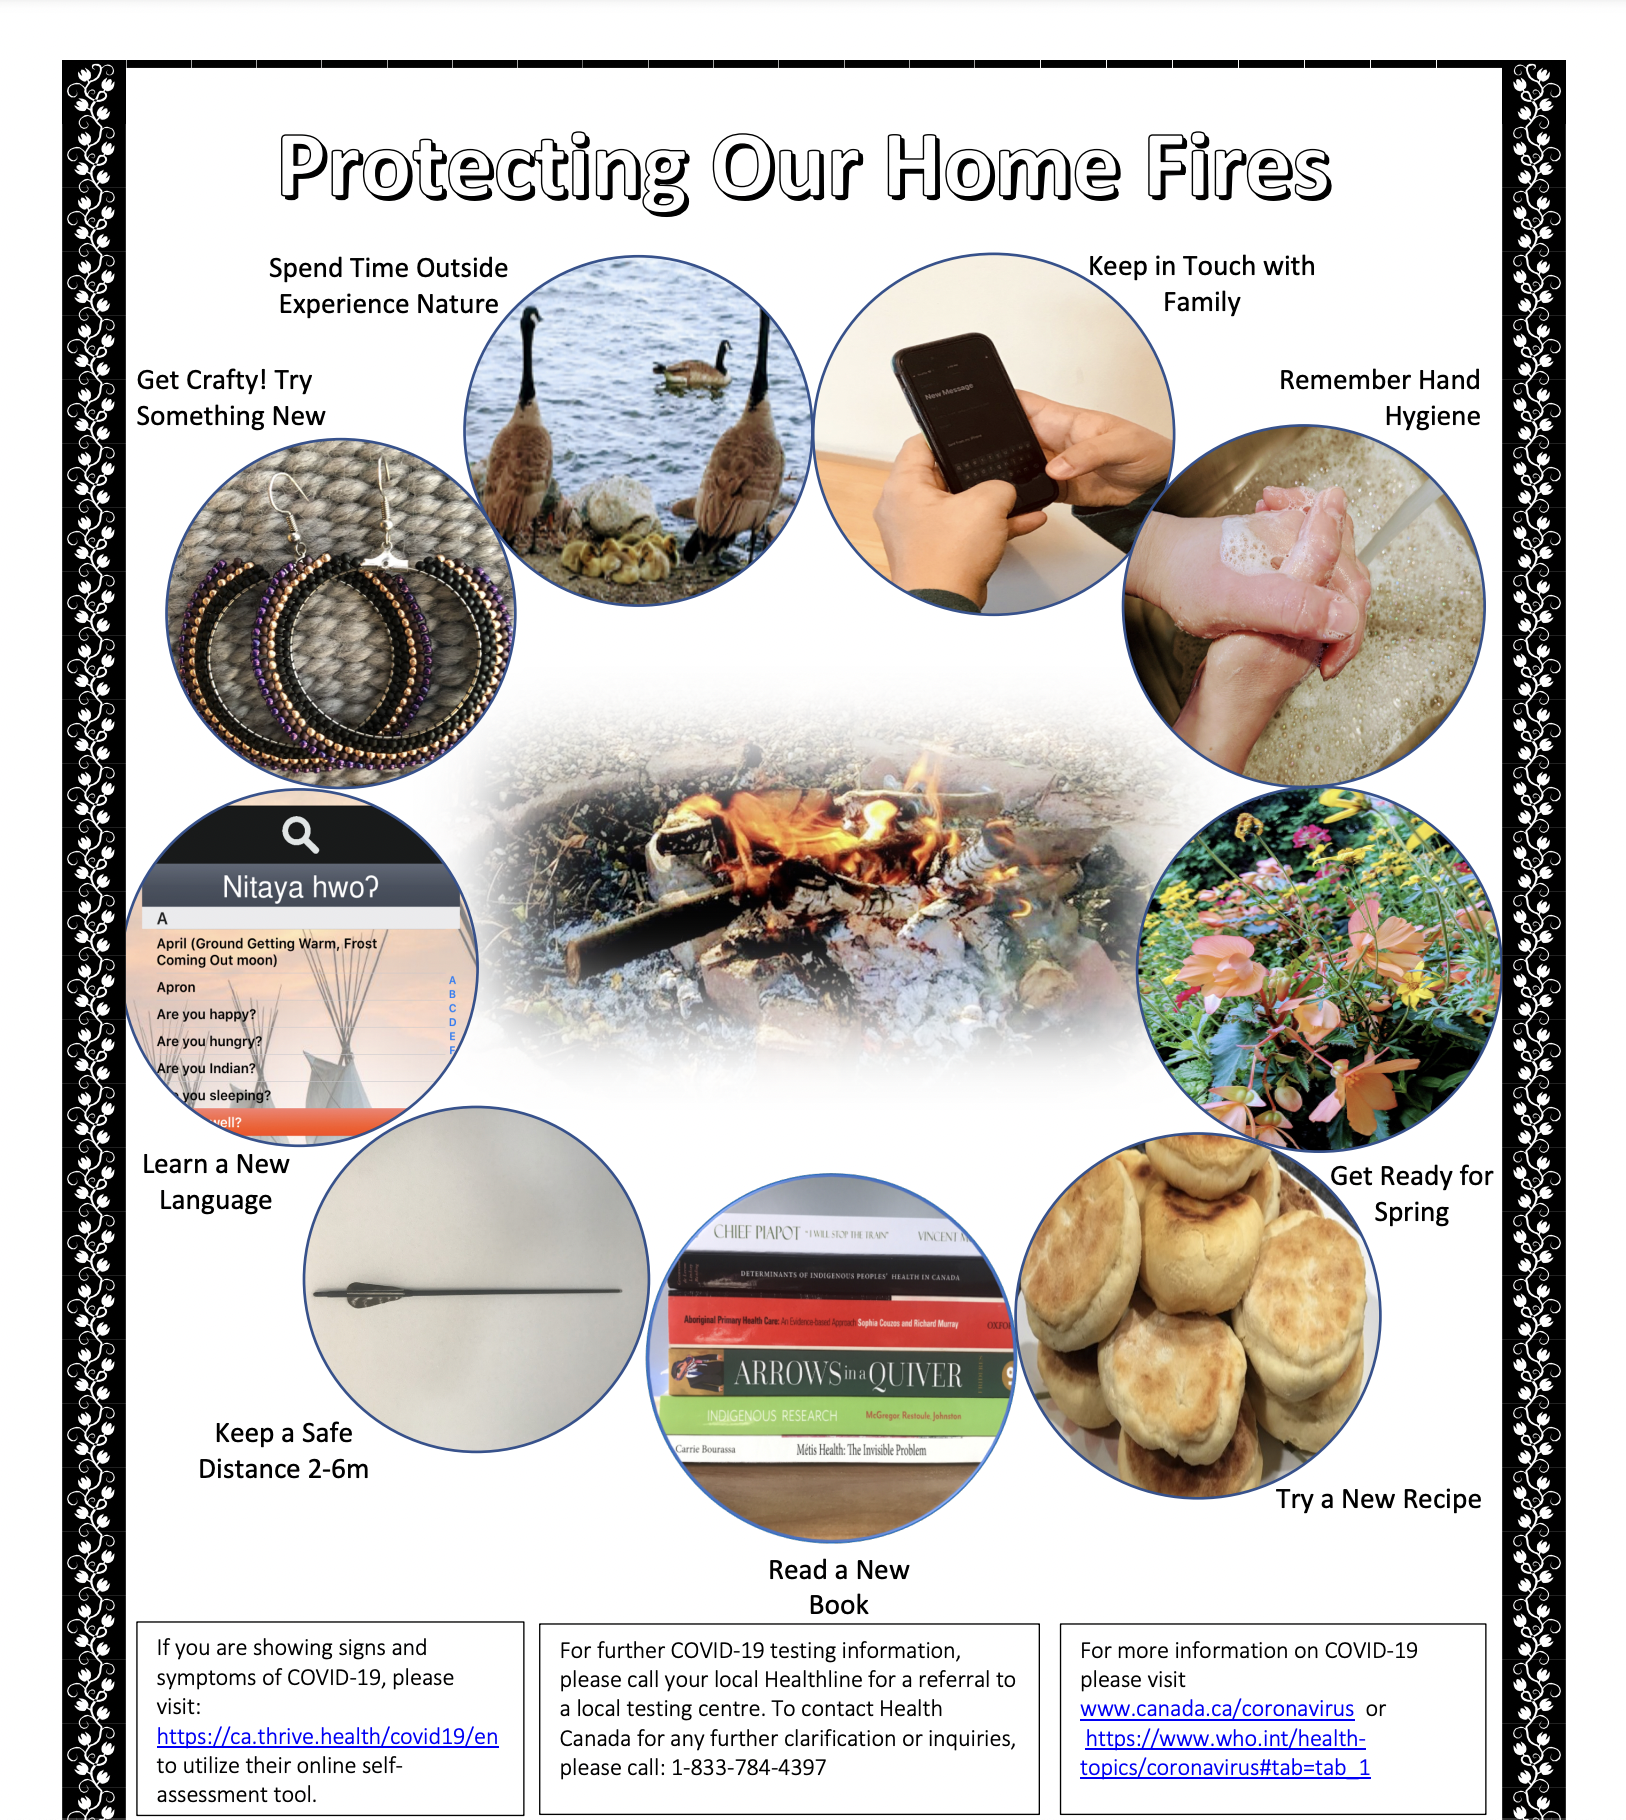 Protecting our home fires information sheet